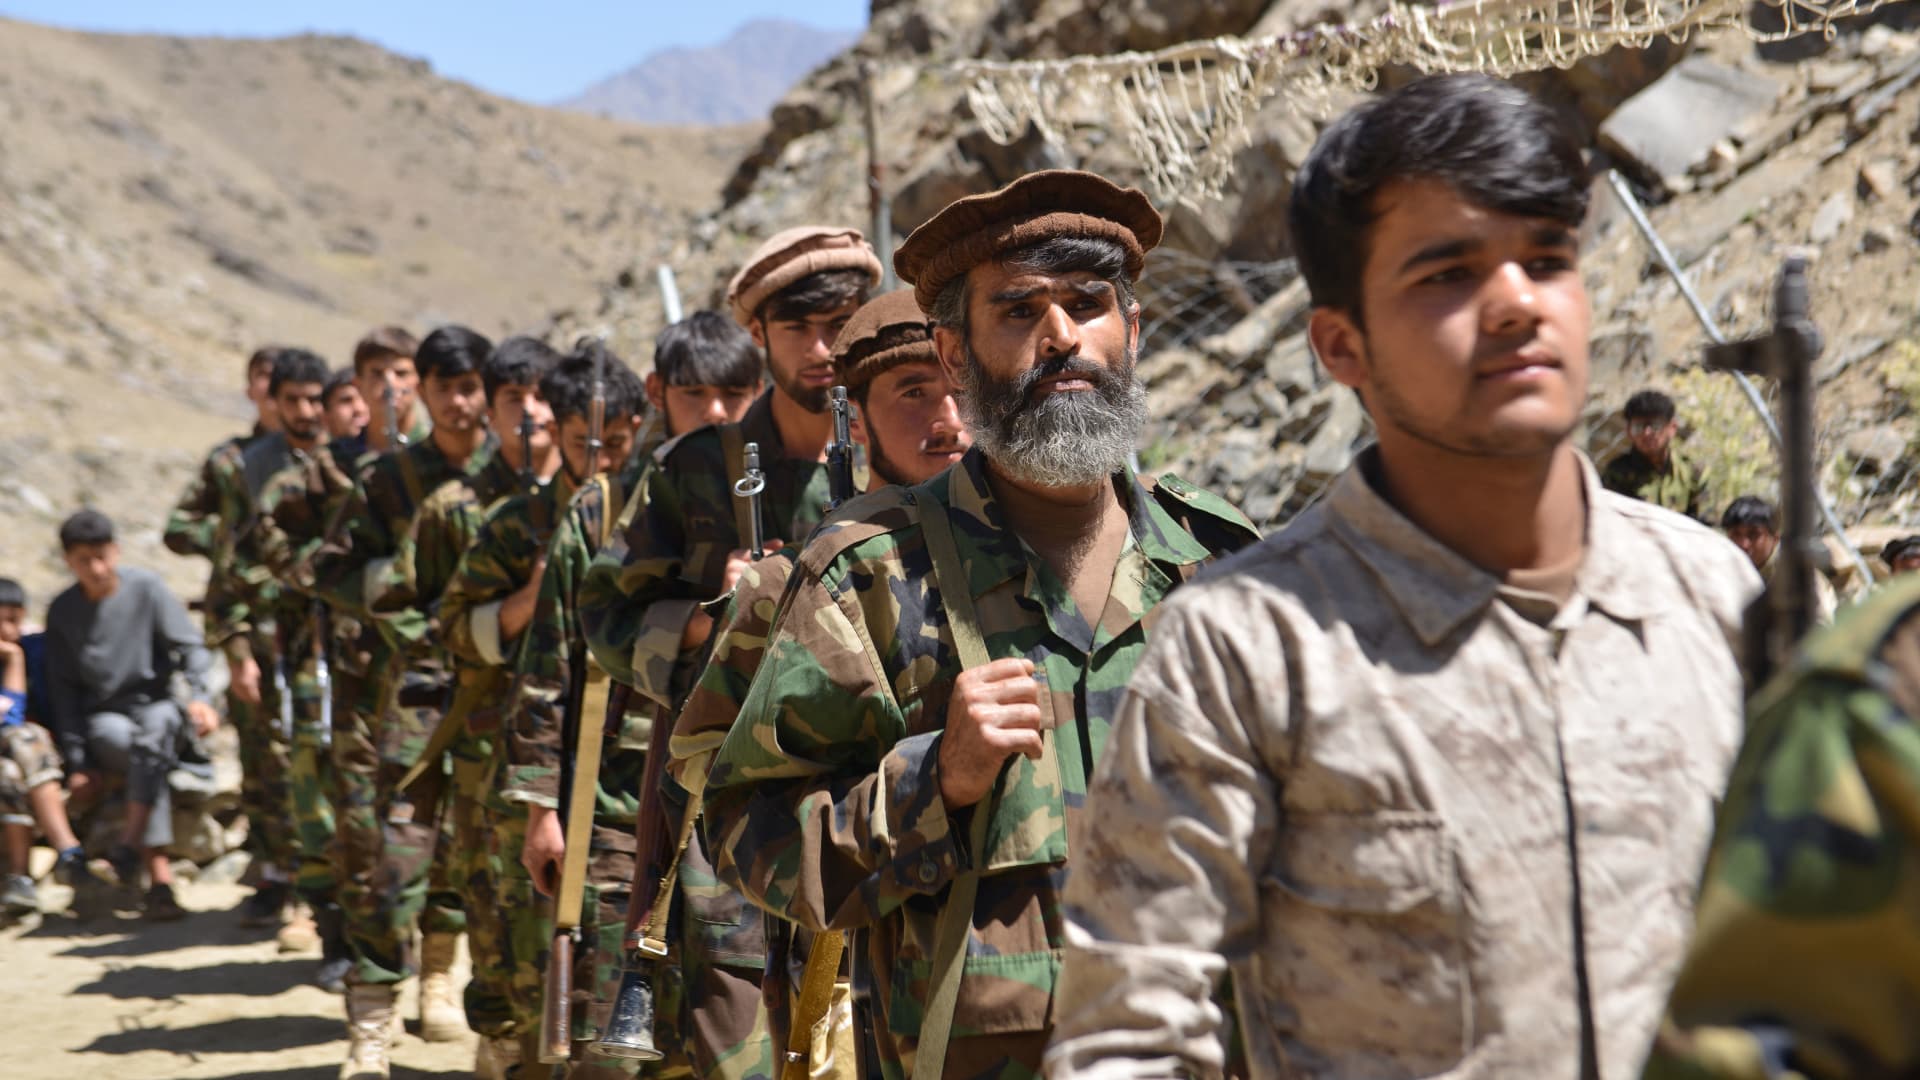 Afghan resistance movement and anti-Taliban uprising forces take part in military training at the Abdullah Khil area of Dara district in Panjshir province on August 24, 2021.